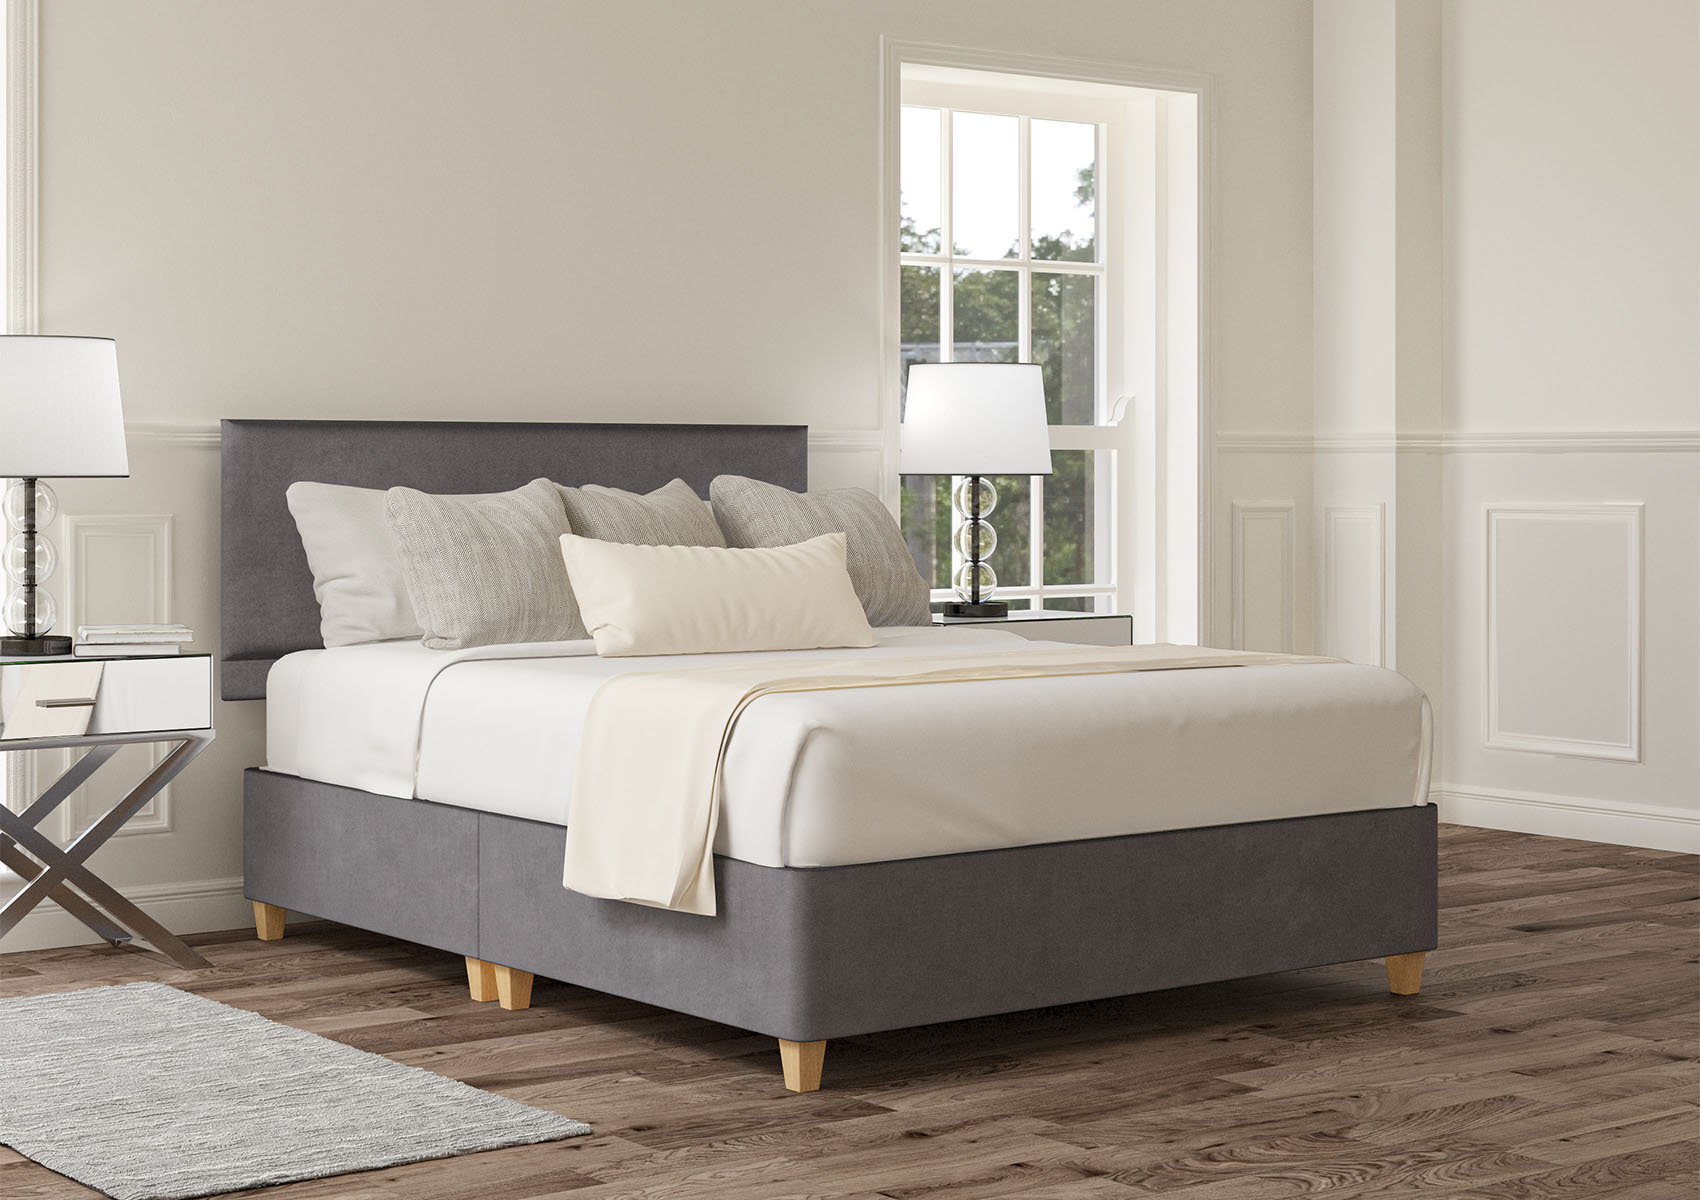 View Henley Naples Cream Upholstered Super King Bed Time4Sleep information